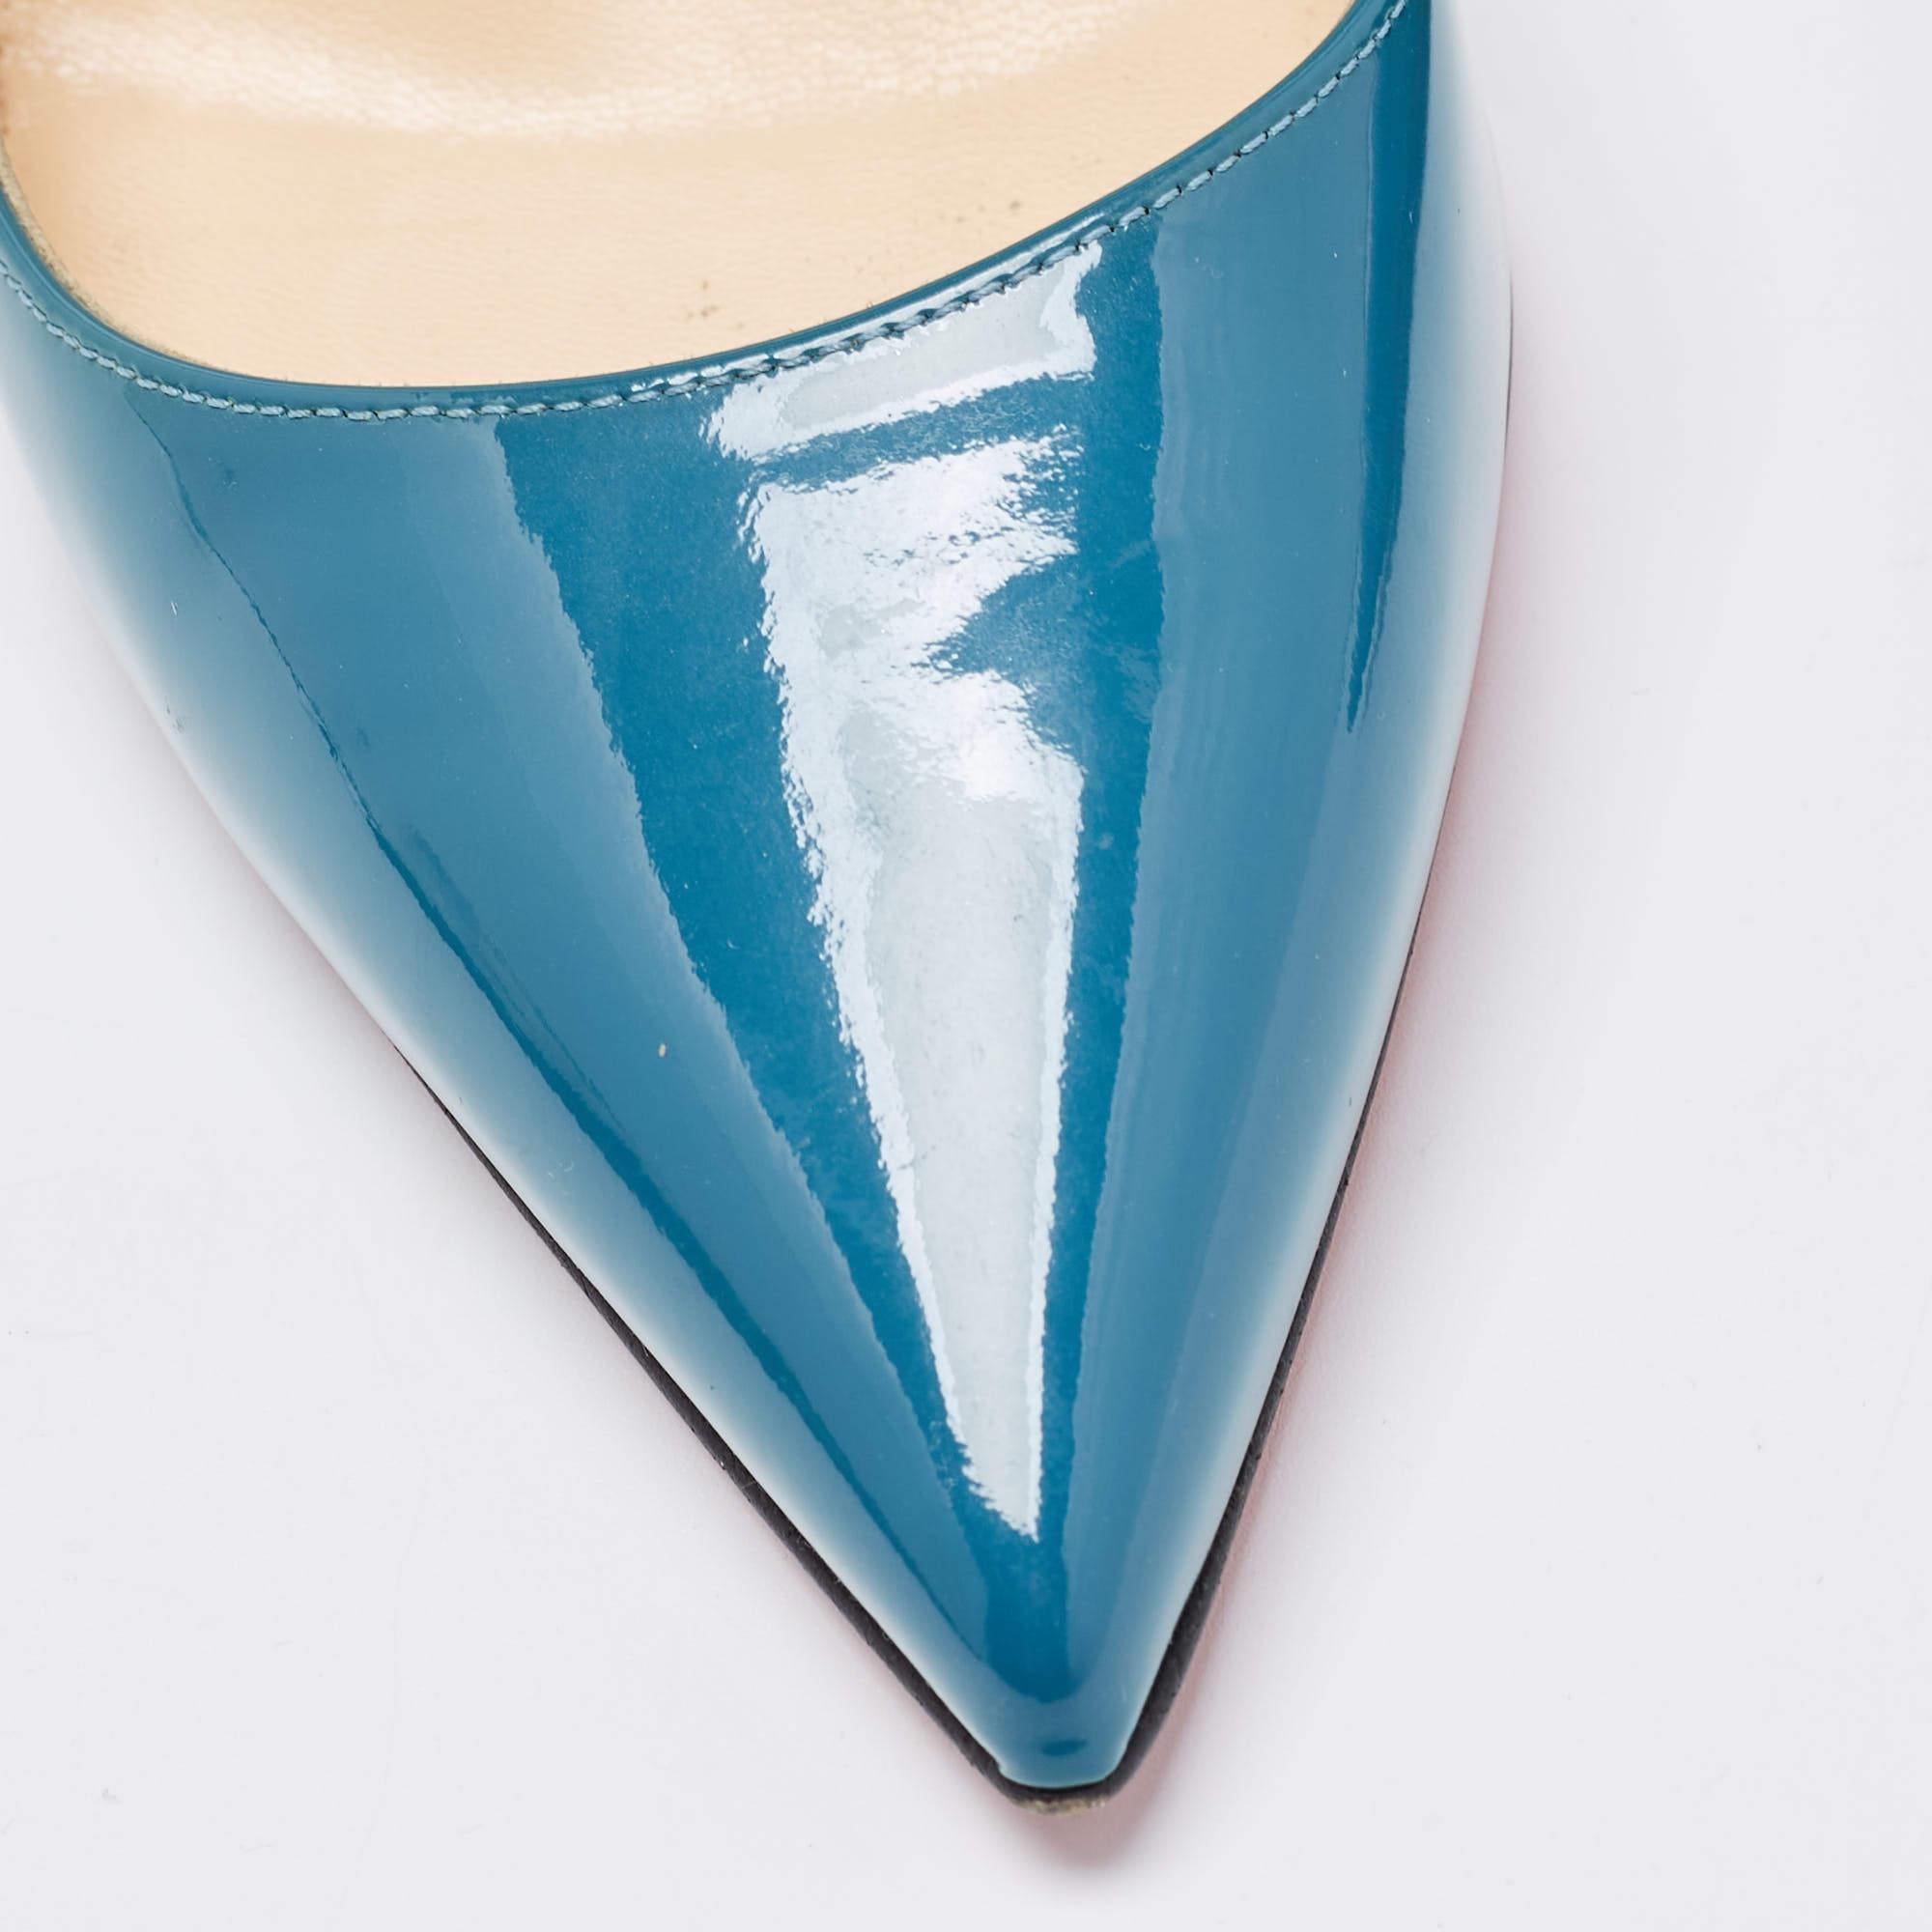 Christian Louboutin Teal Patent Leather So Kate Pumps Size 37.5 3